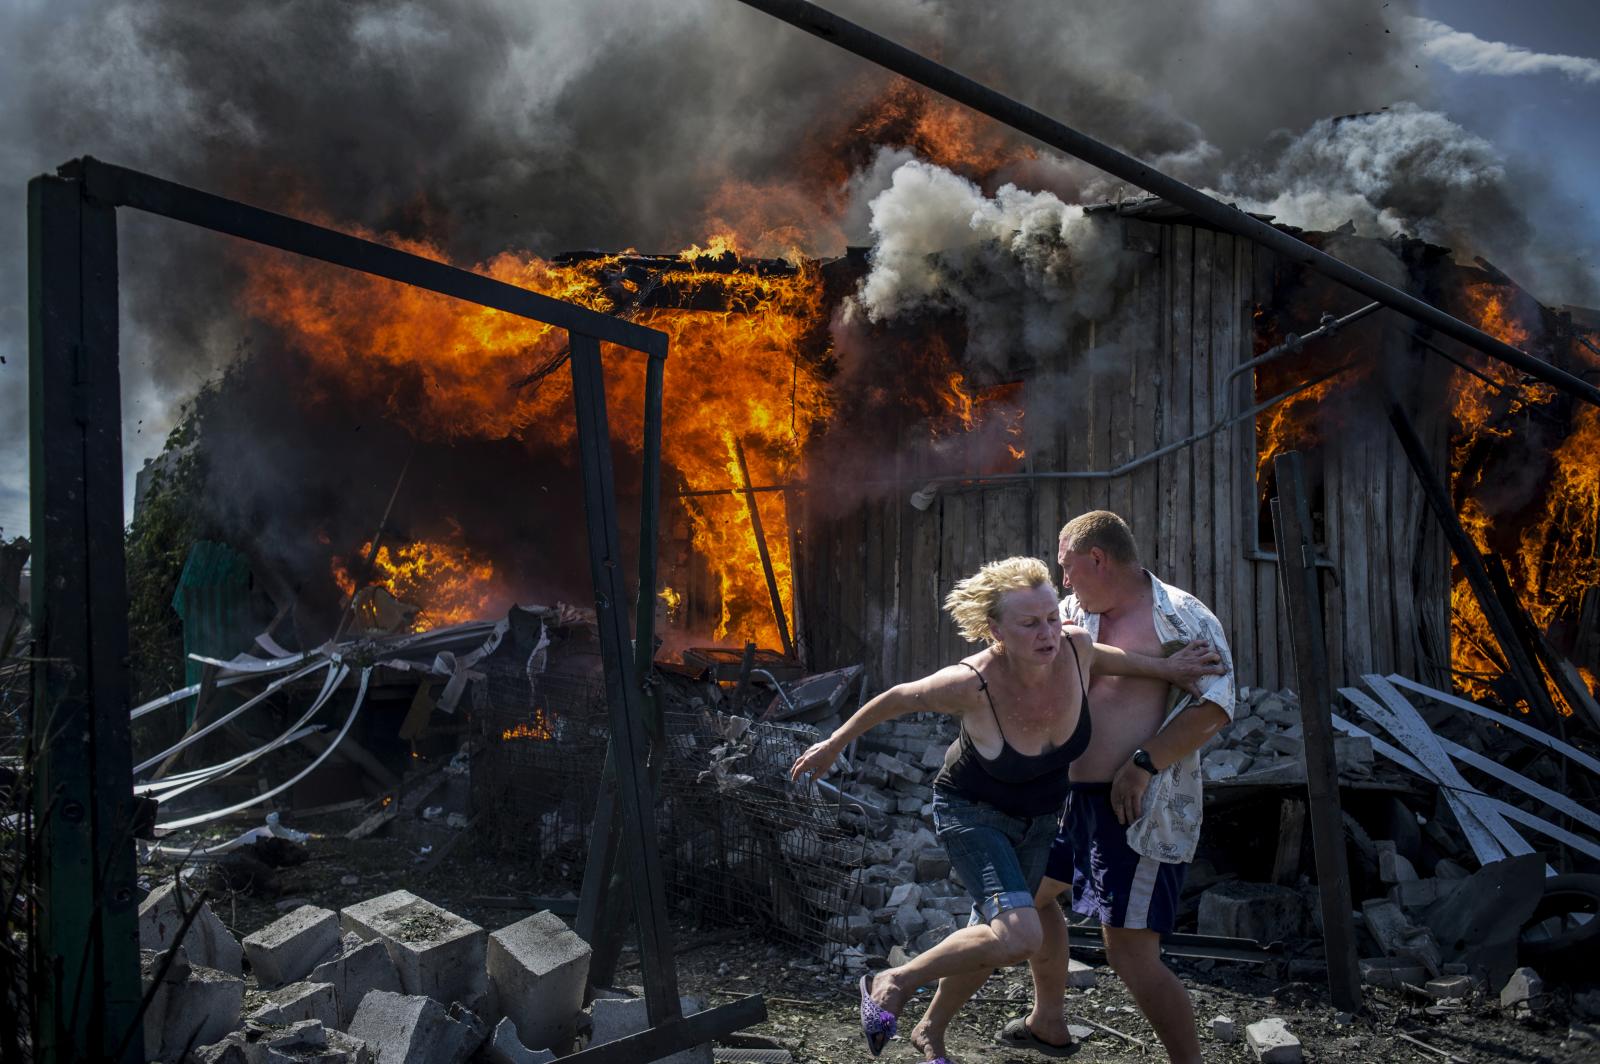 Civilians escape from a fire at...ttack in the Luhanskaya village